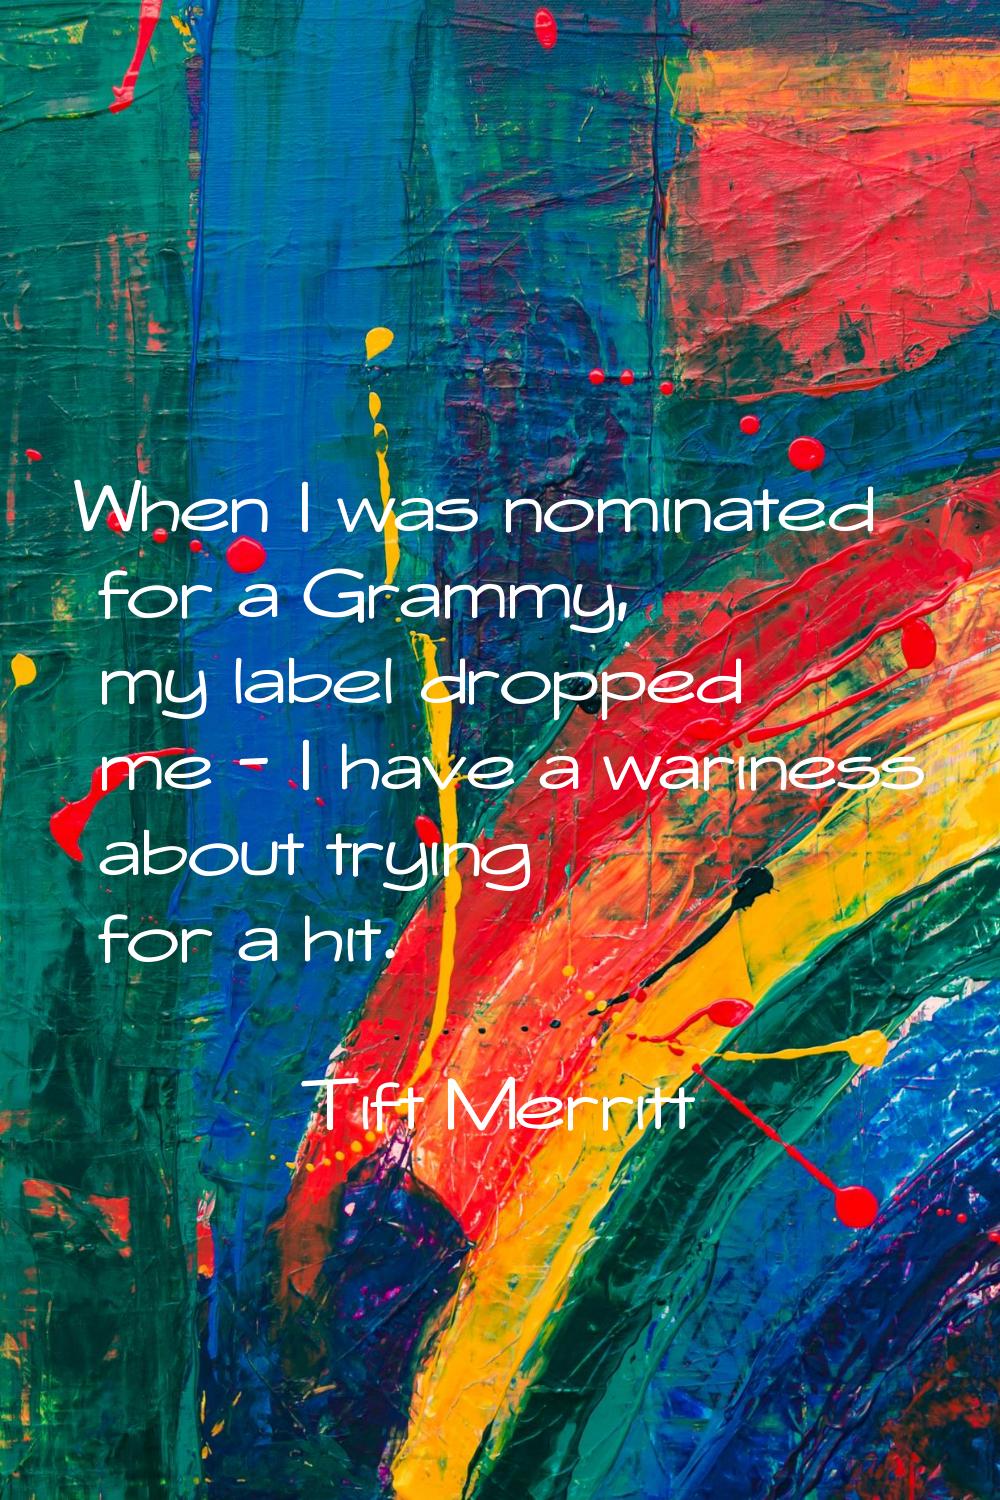 When I was nominated for a Grammy, my label dropped me - I have a wariness about trying for a hit.